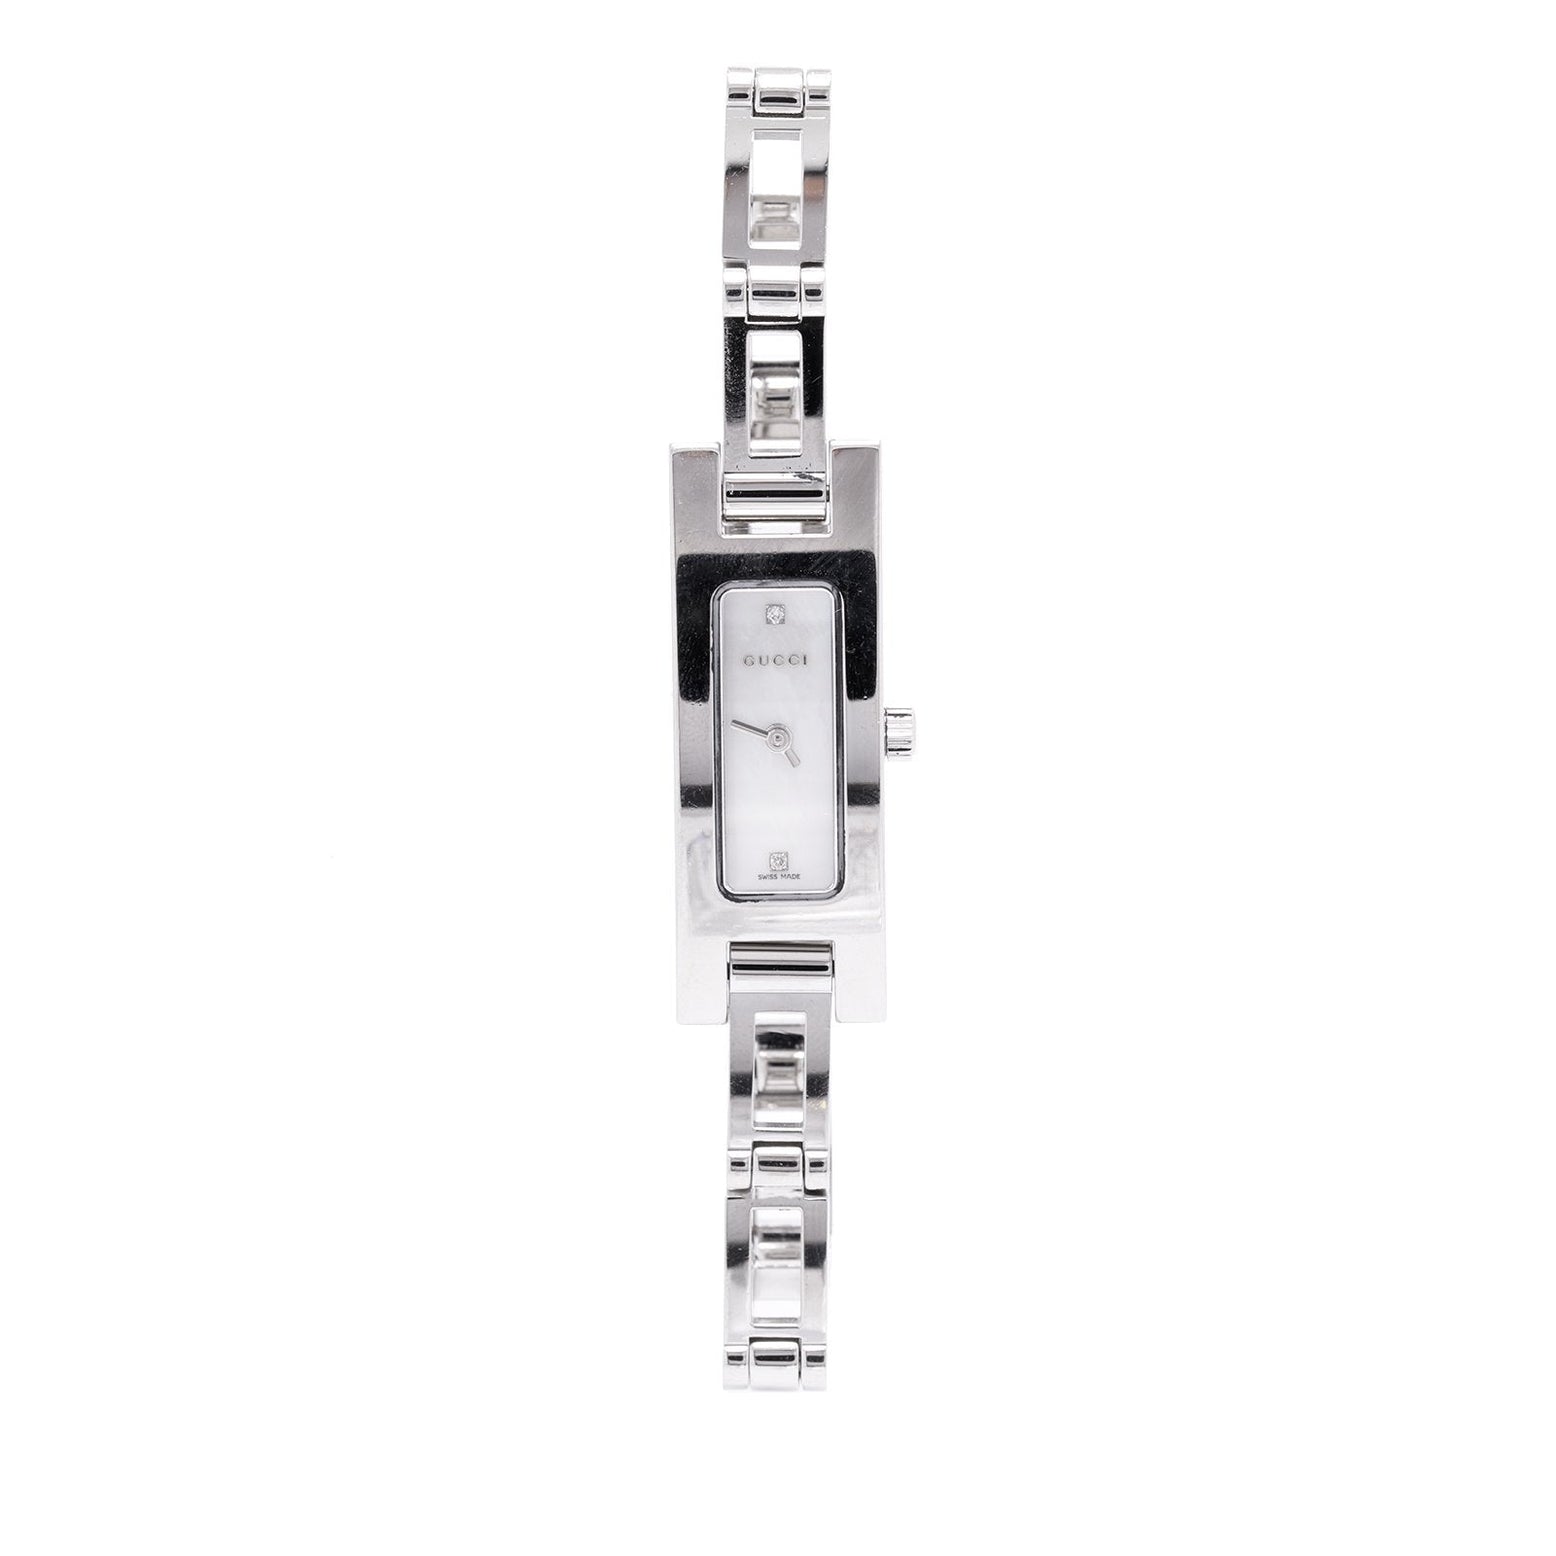 Gucci 3900 Series Watch — Oliver Jewellery